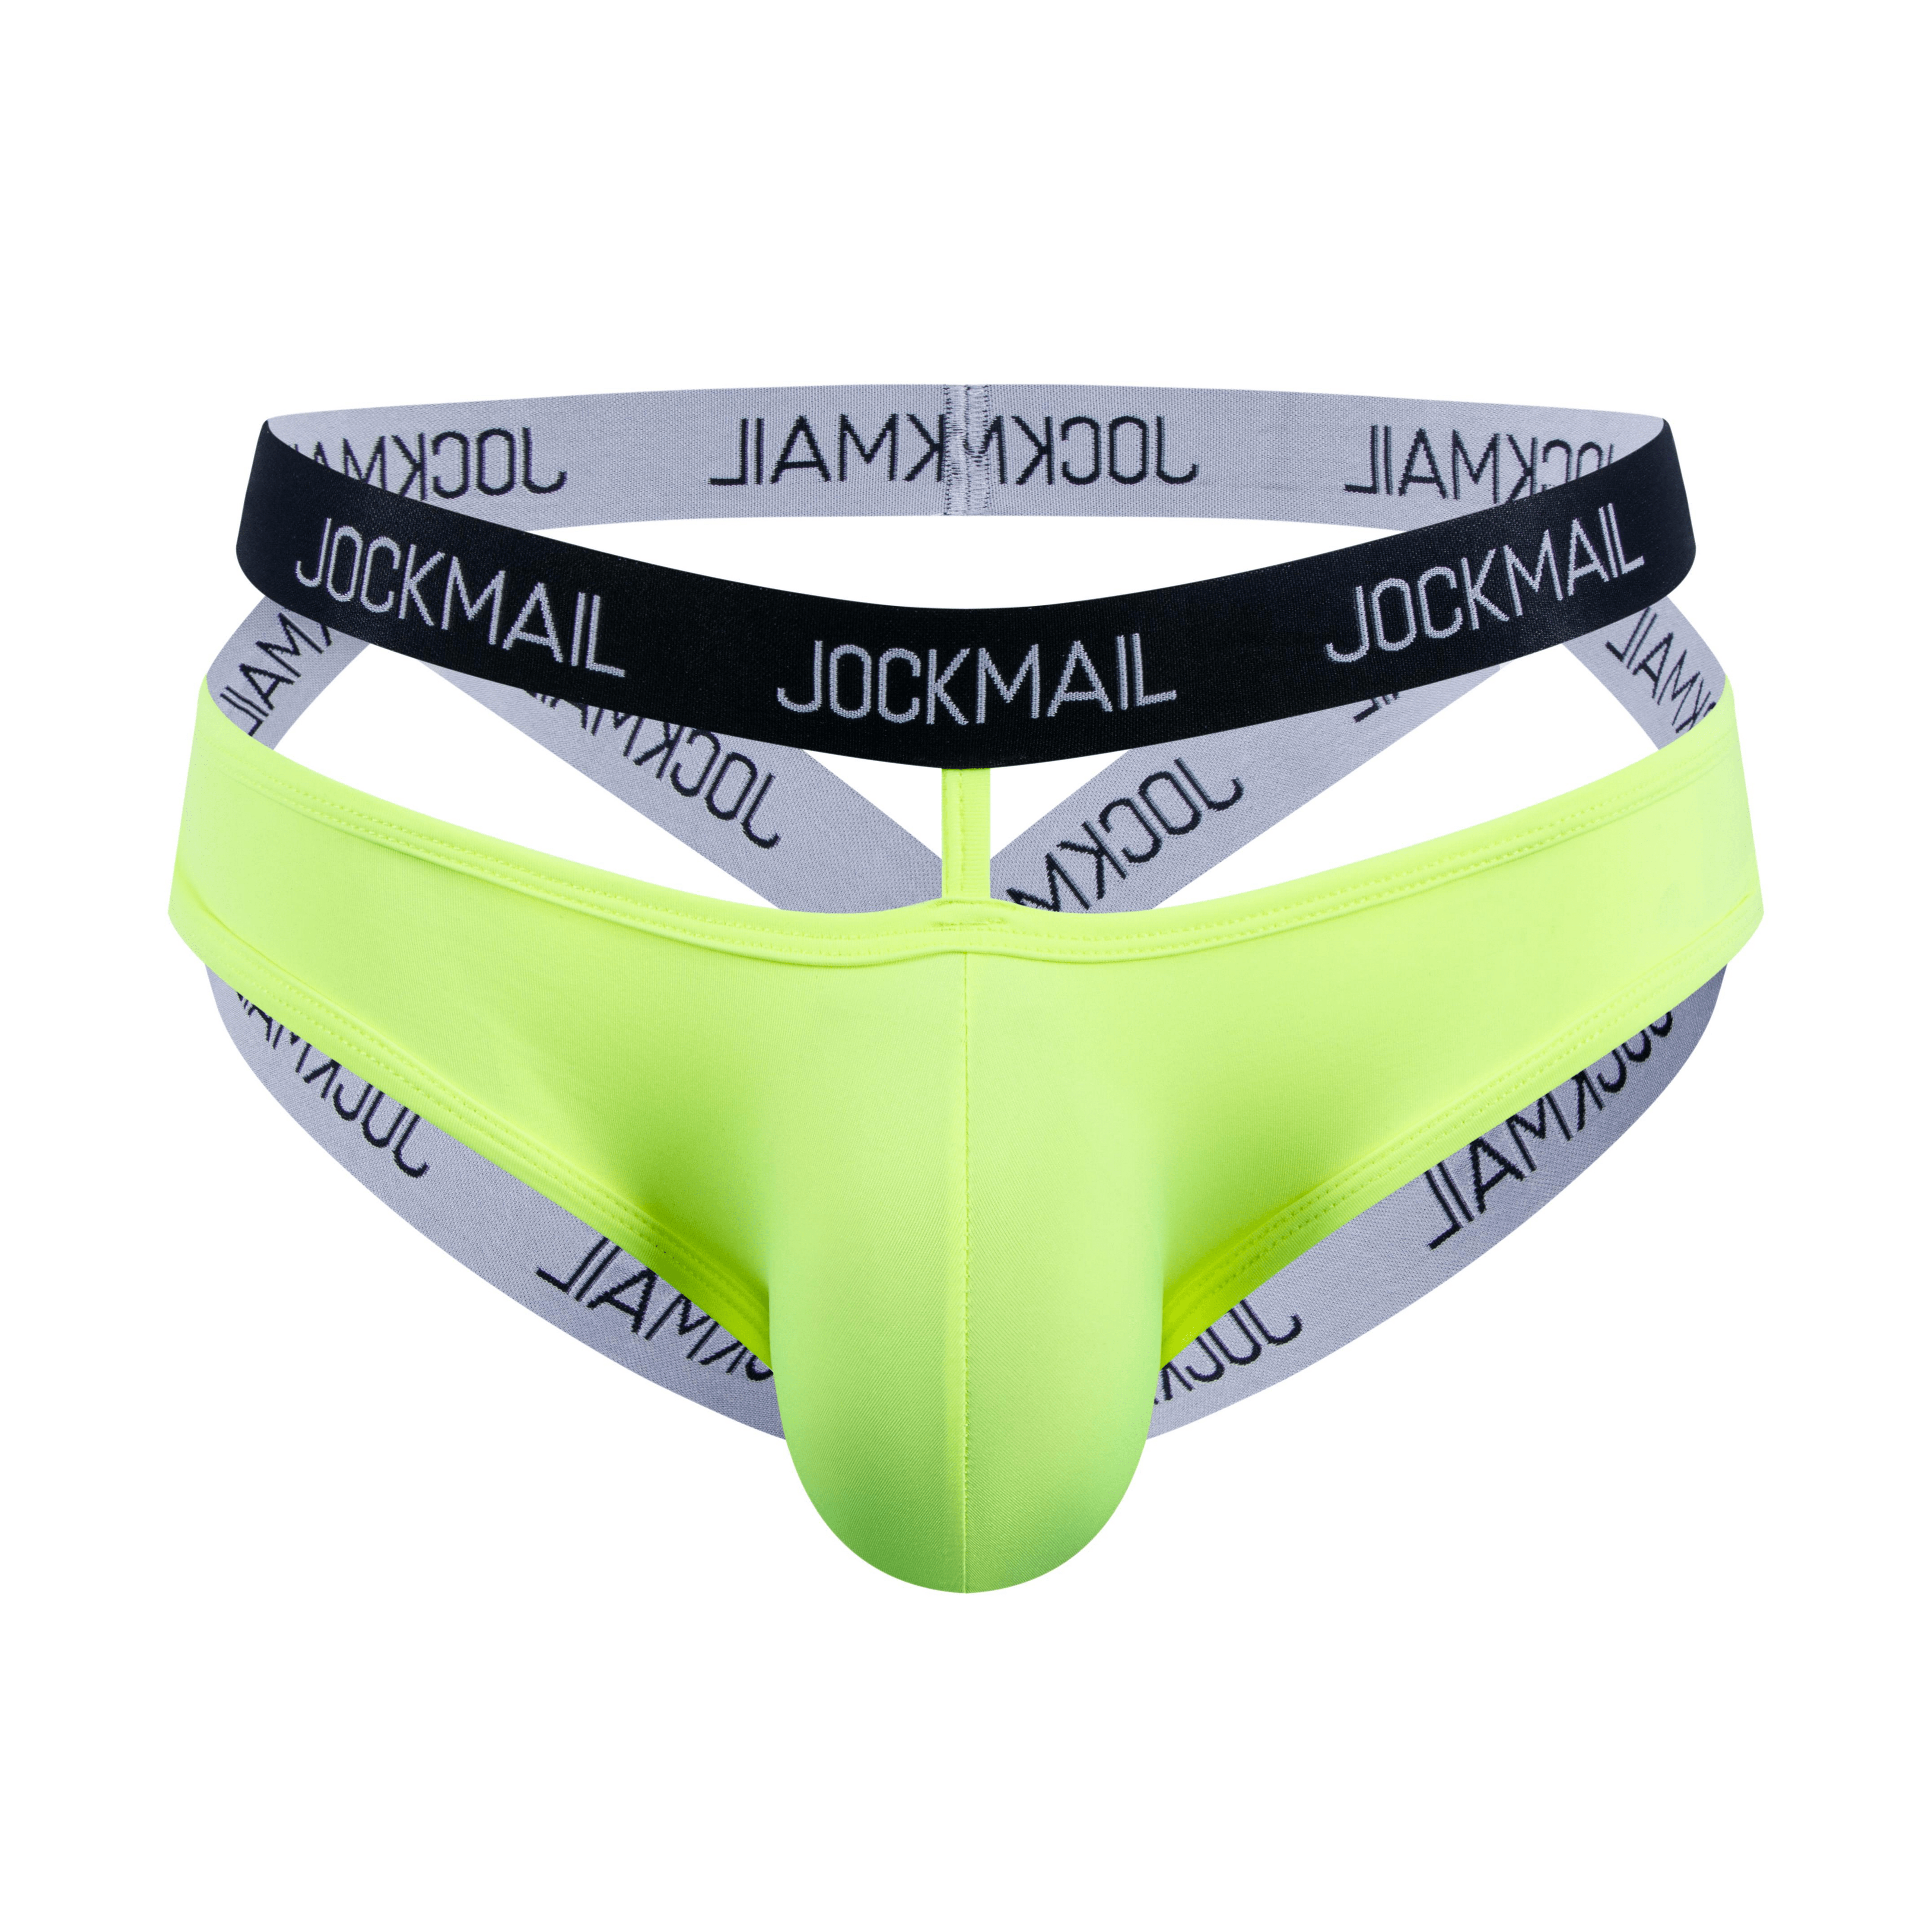 How Do Jockstraps Compare to Other Underwear? – TIMOTEO